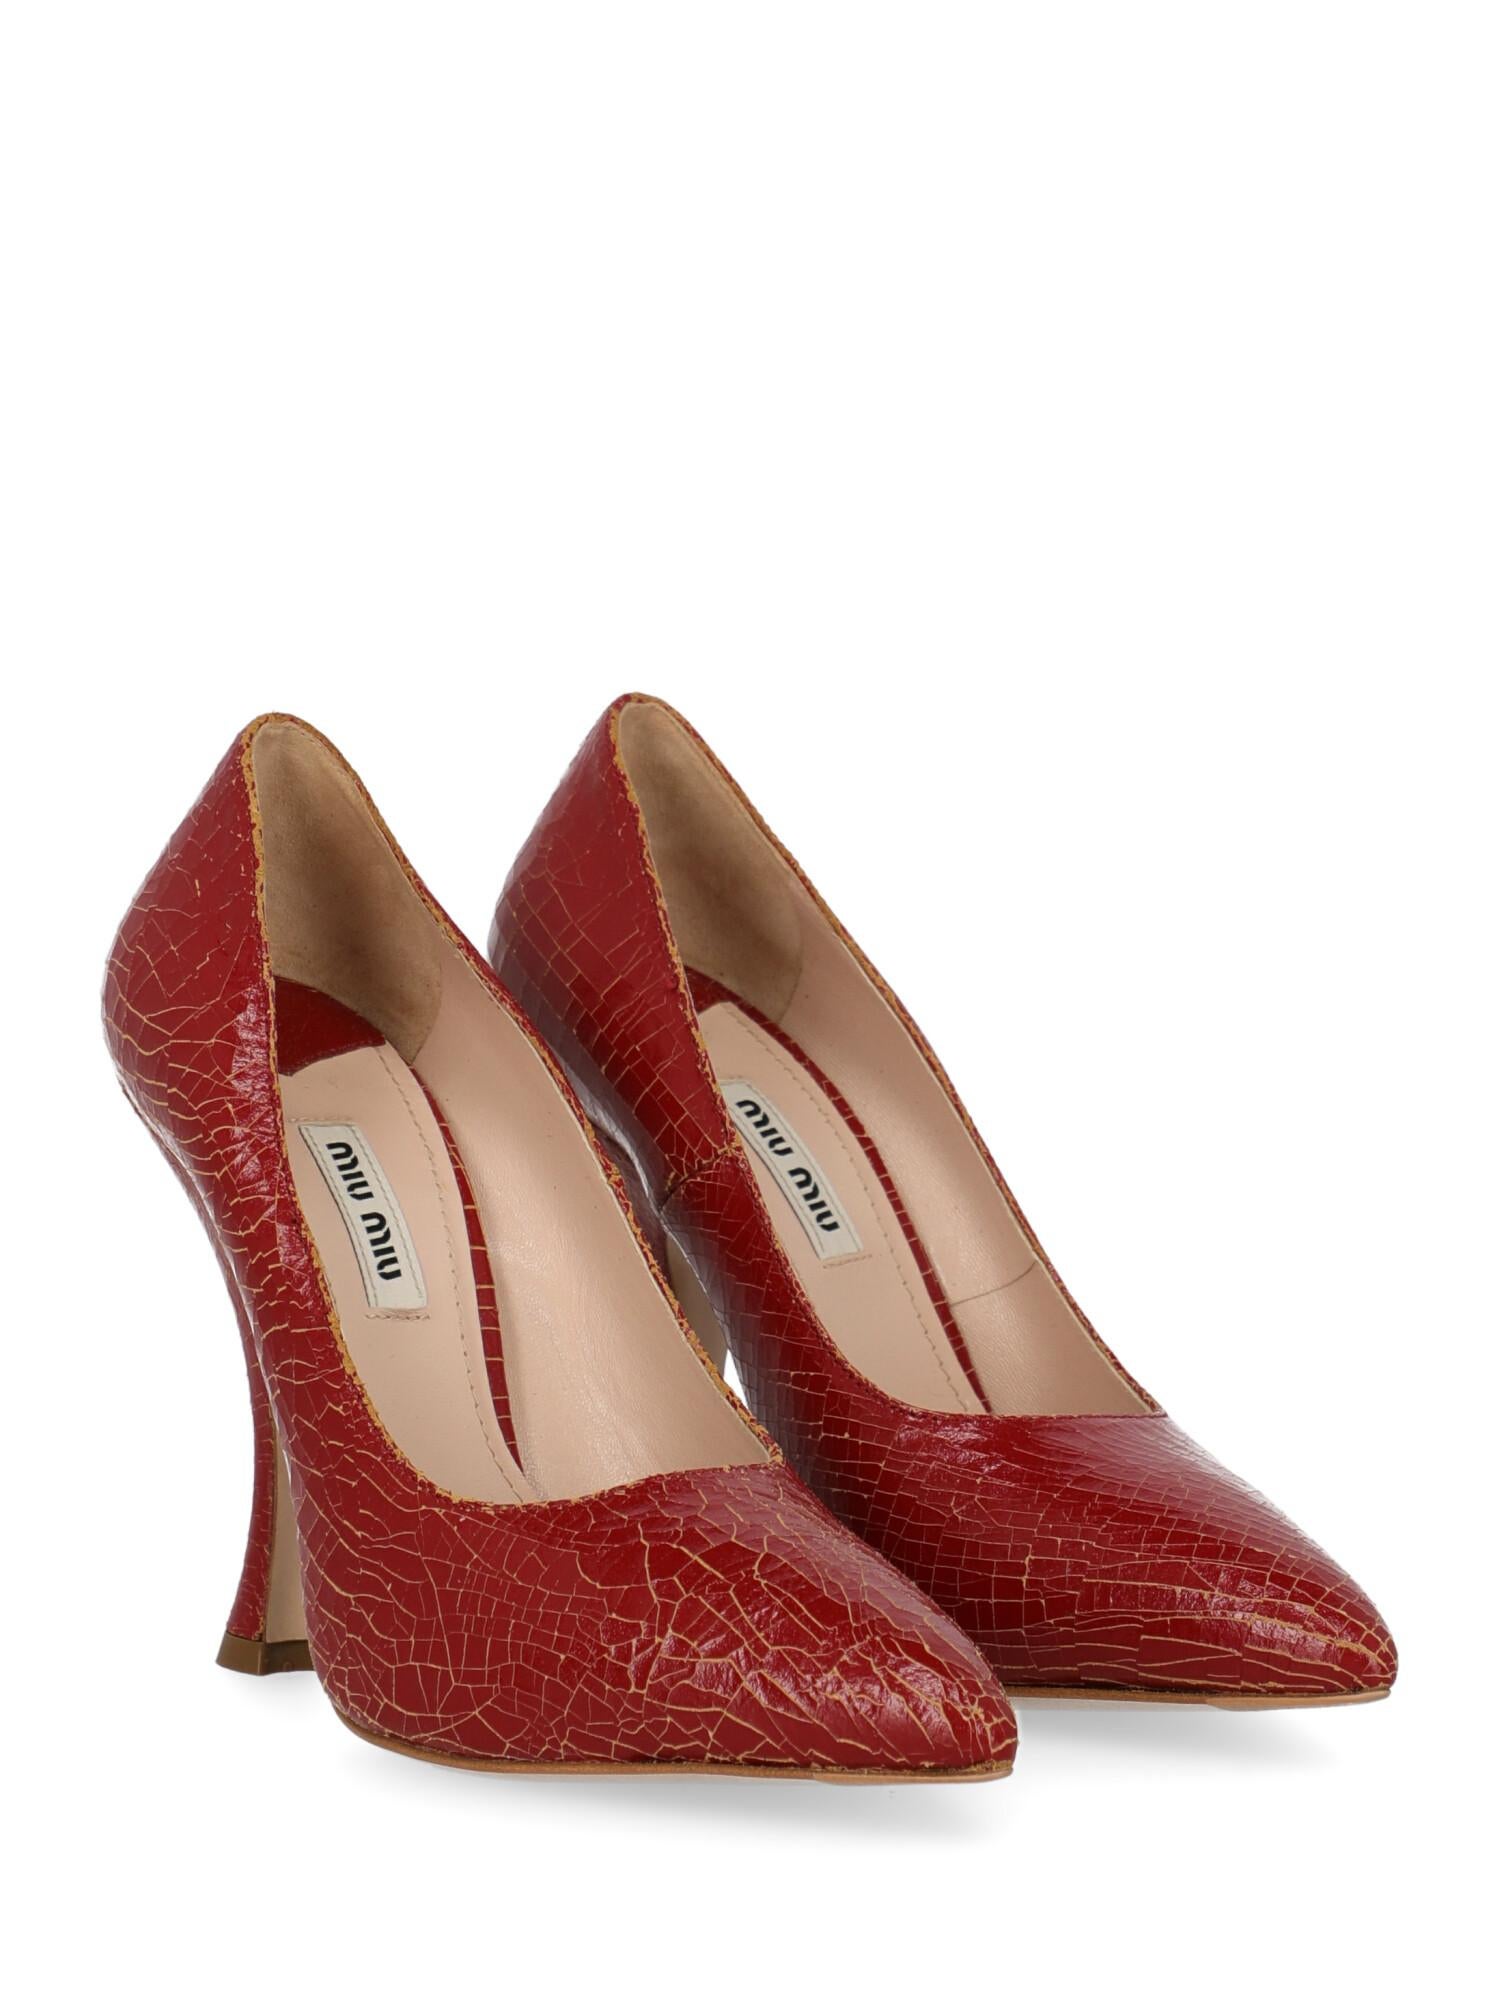 Pumps, leather, other patterns, crinkle effect, internal logo, pointed toe, tapered heel, high heel. Product Condition: Very Good. Sole: negligible marks. Insole: negligible stains
